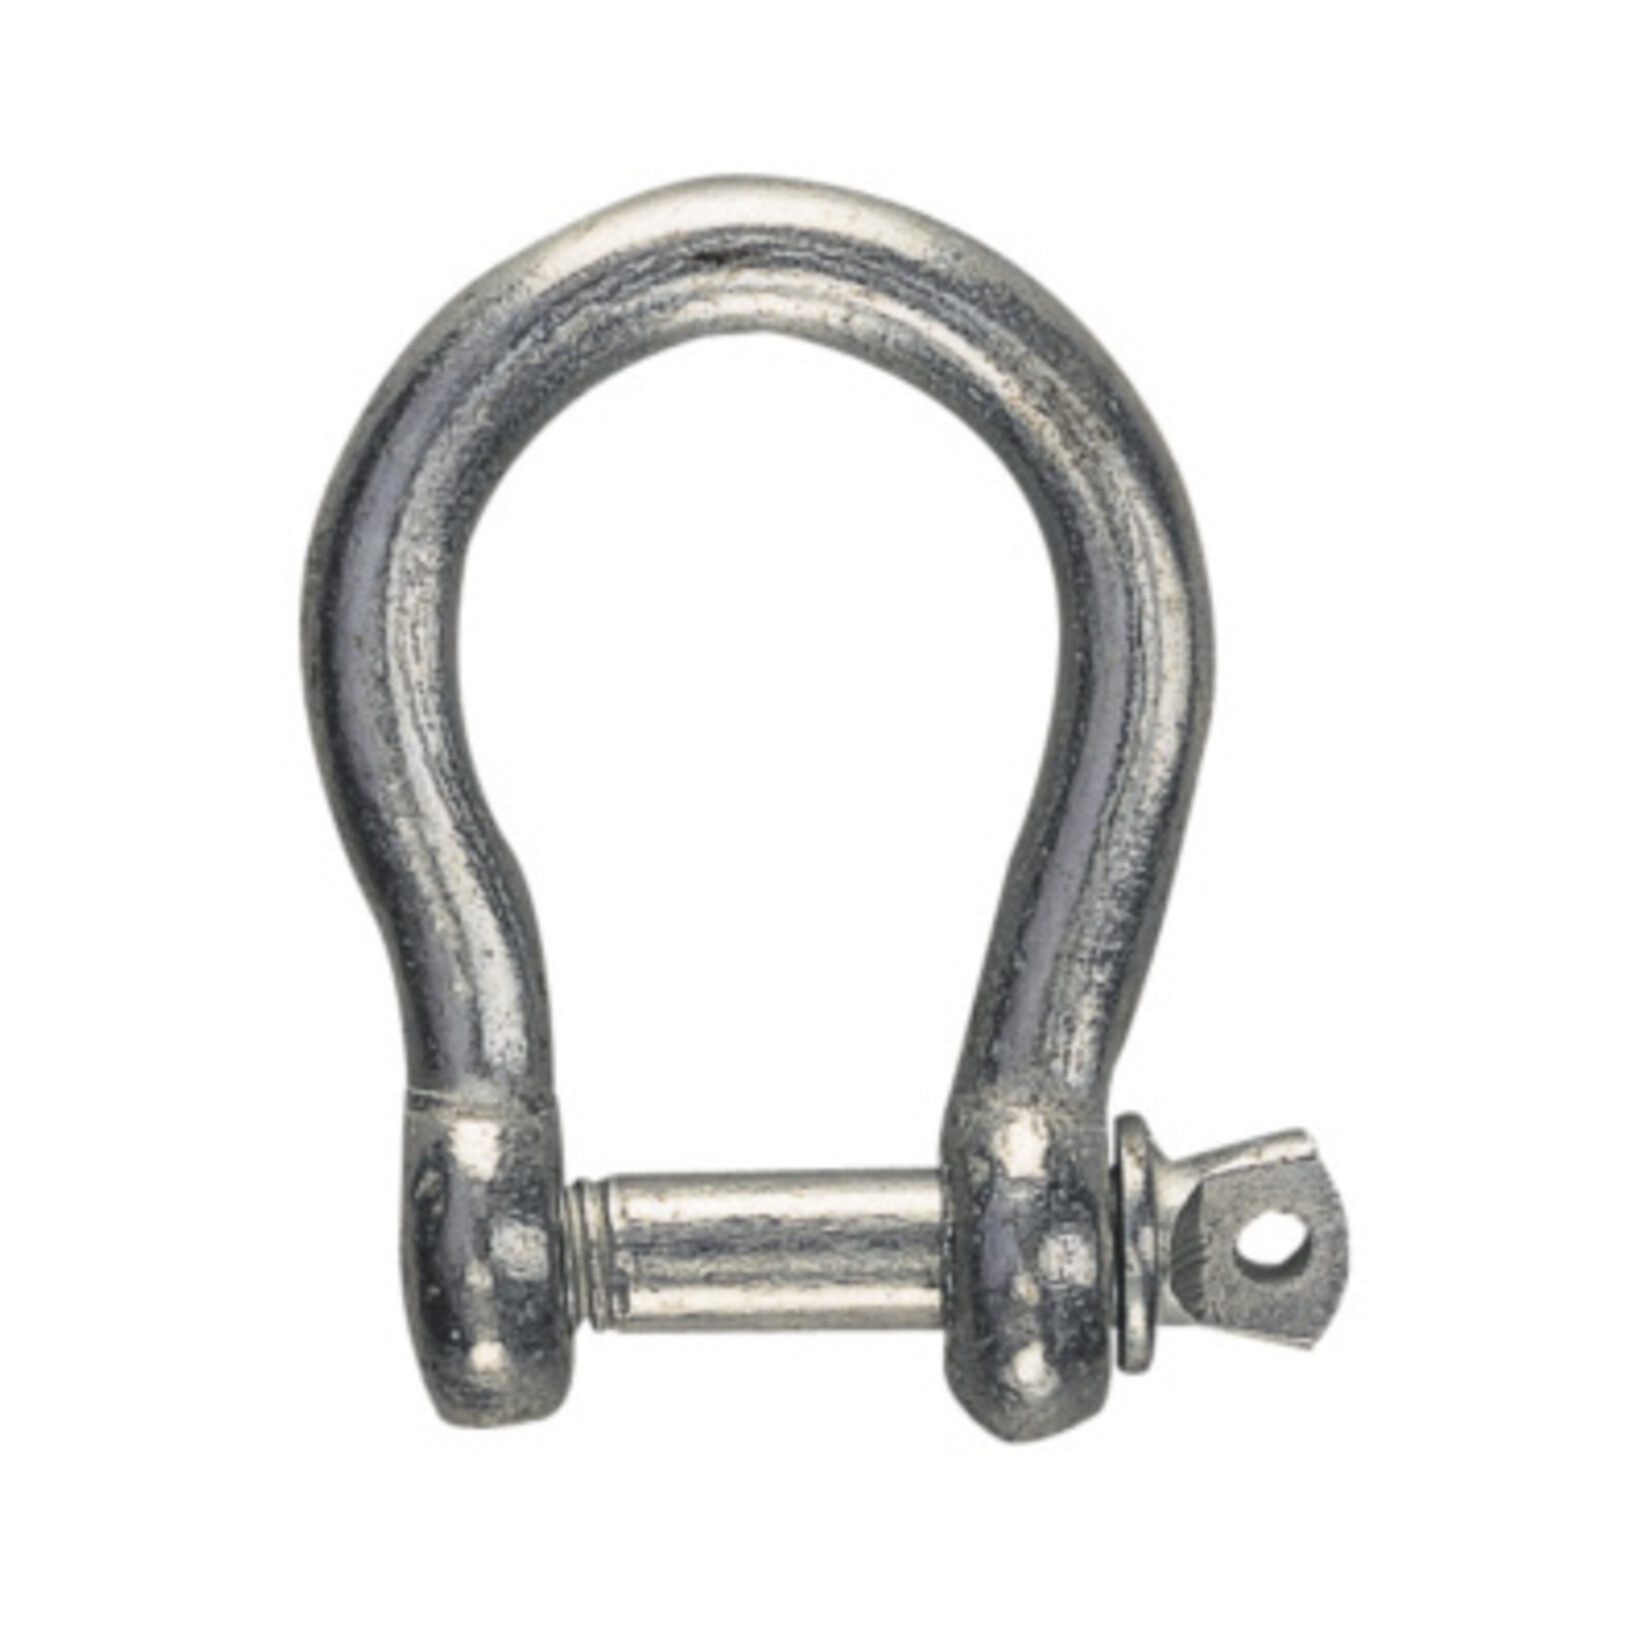 Plastimo Shackle gal bow dia 5mm yellow code (x2)